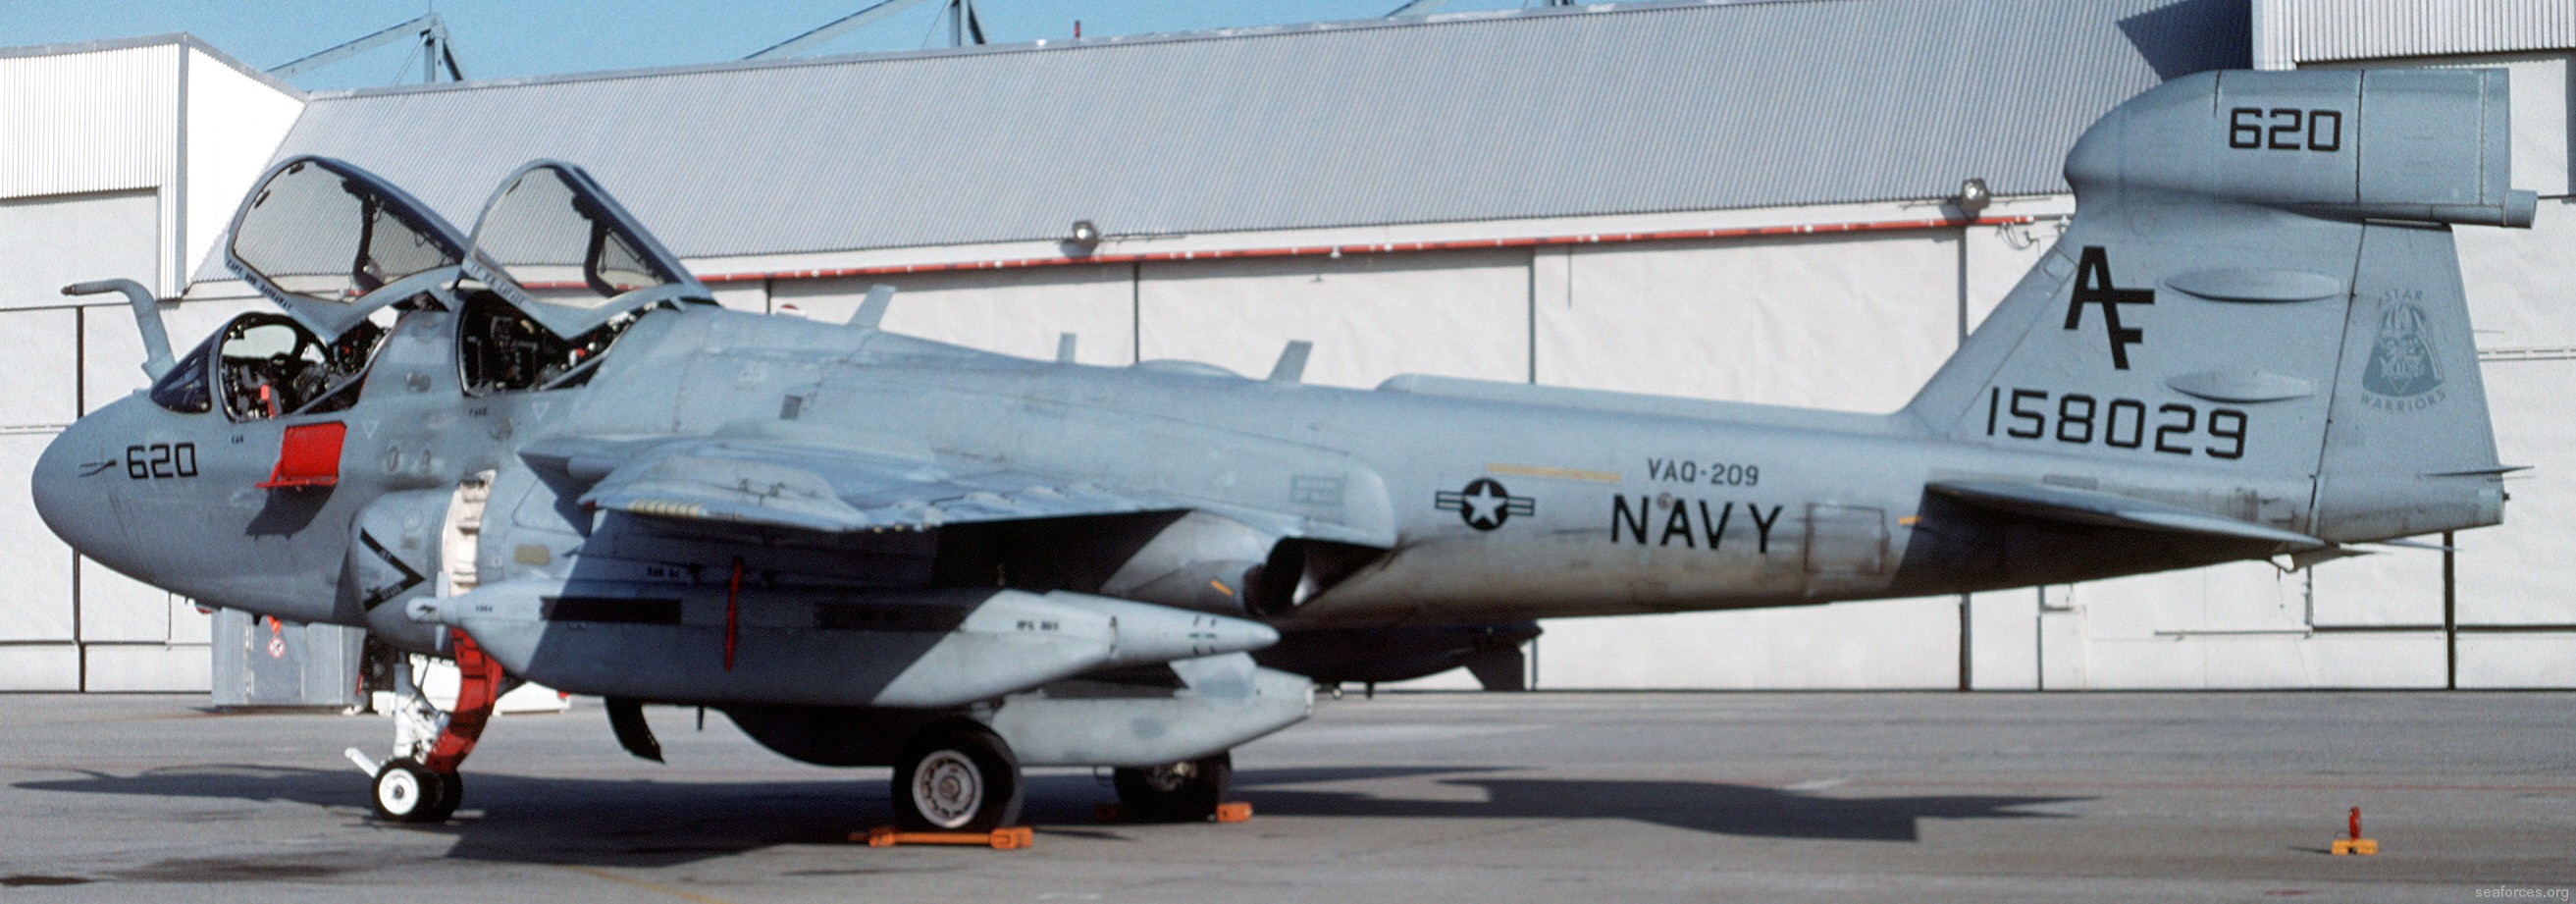 vaq-209 star warriors electronic attack squadron navy ea-6b prowler 33